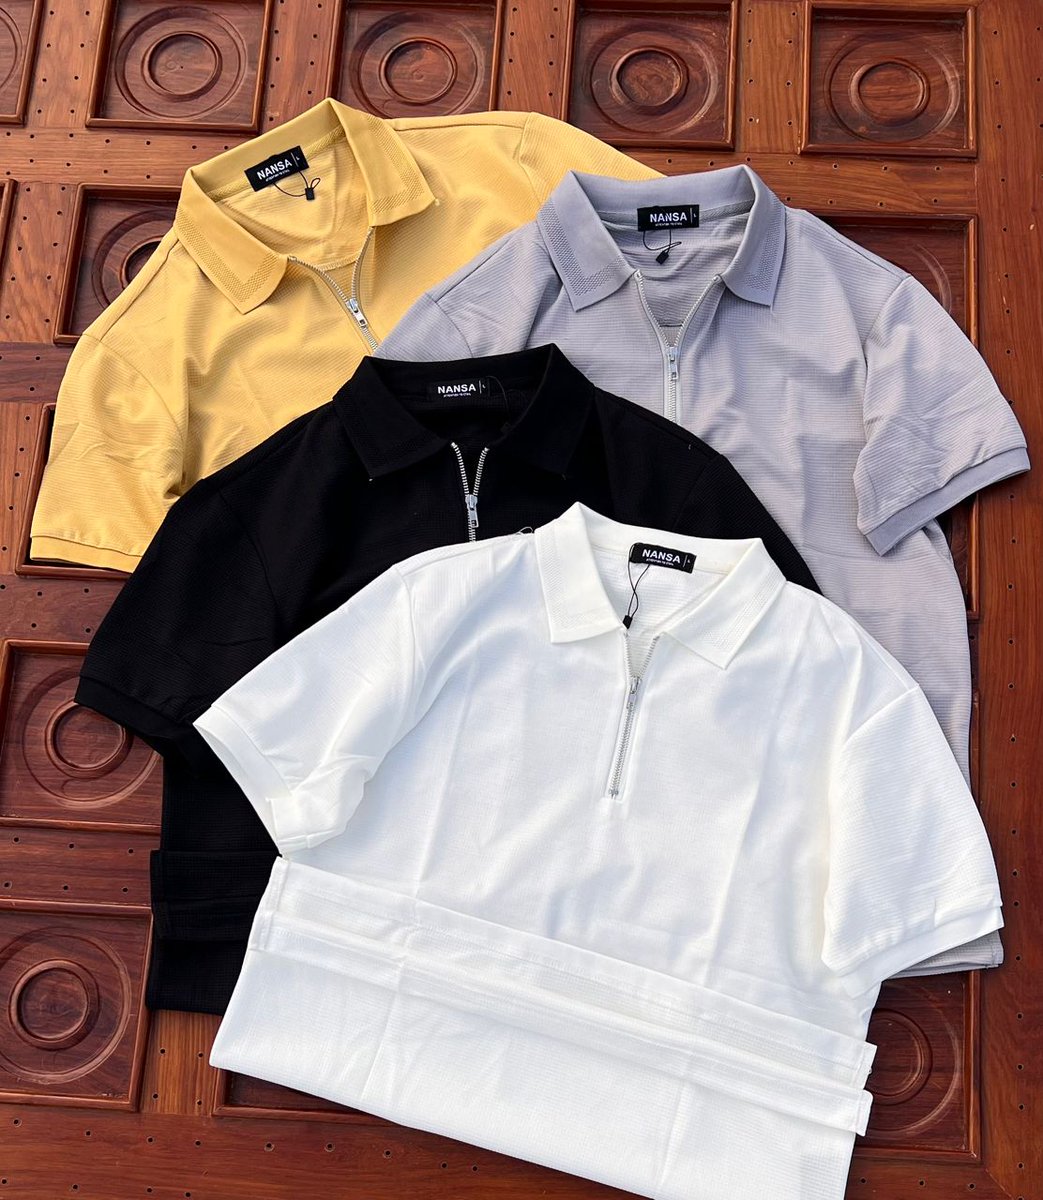 T-shirts polo 1800/- countrywide delivery, call or WhatsApp 0734754485